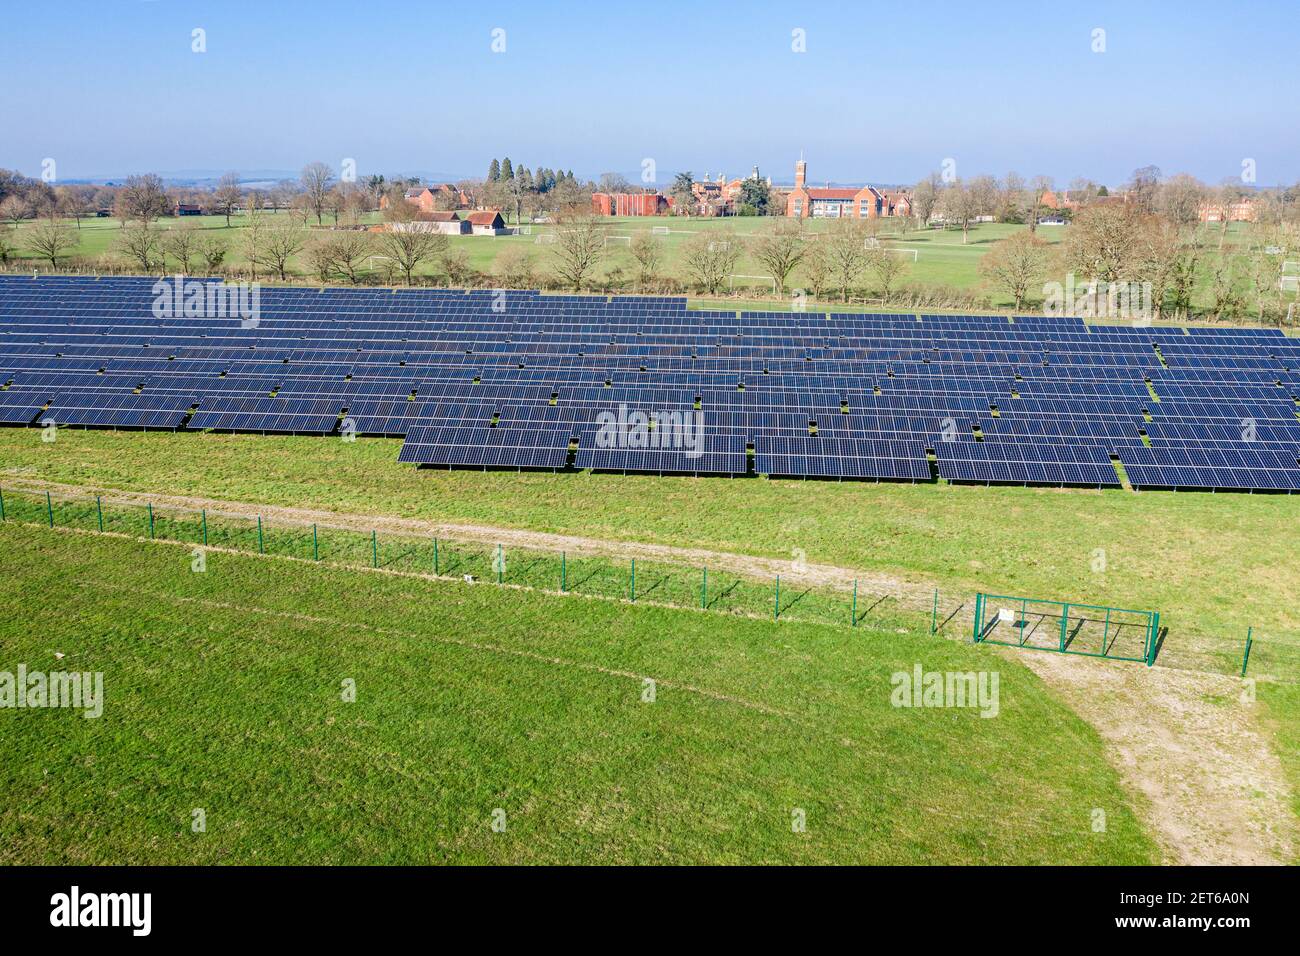 Aerial view of Solar farm with large solar panels in an array, West Sussex, England Stock Photo